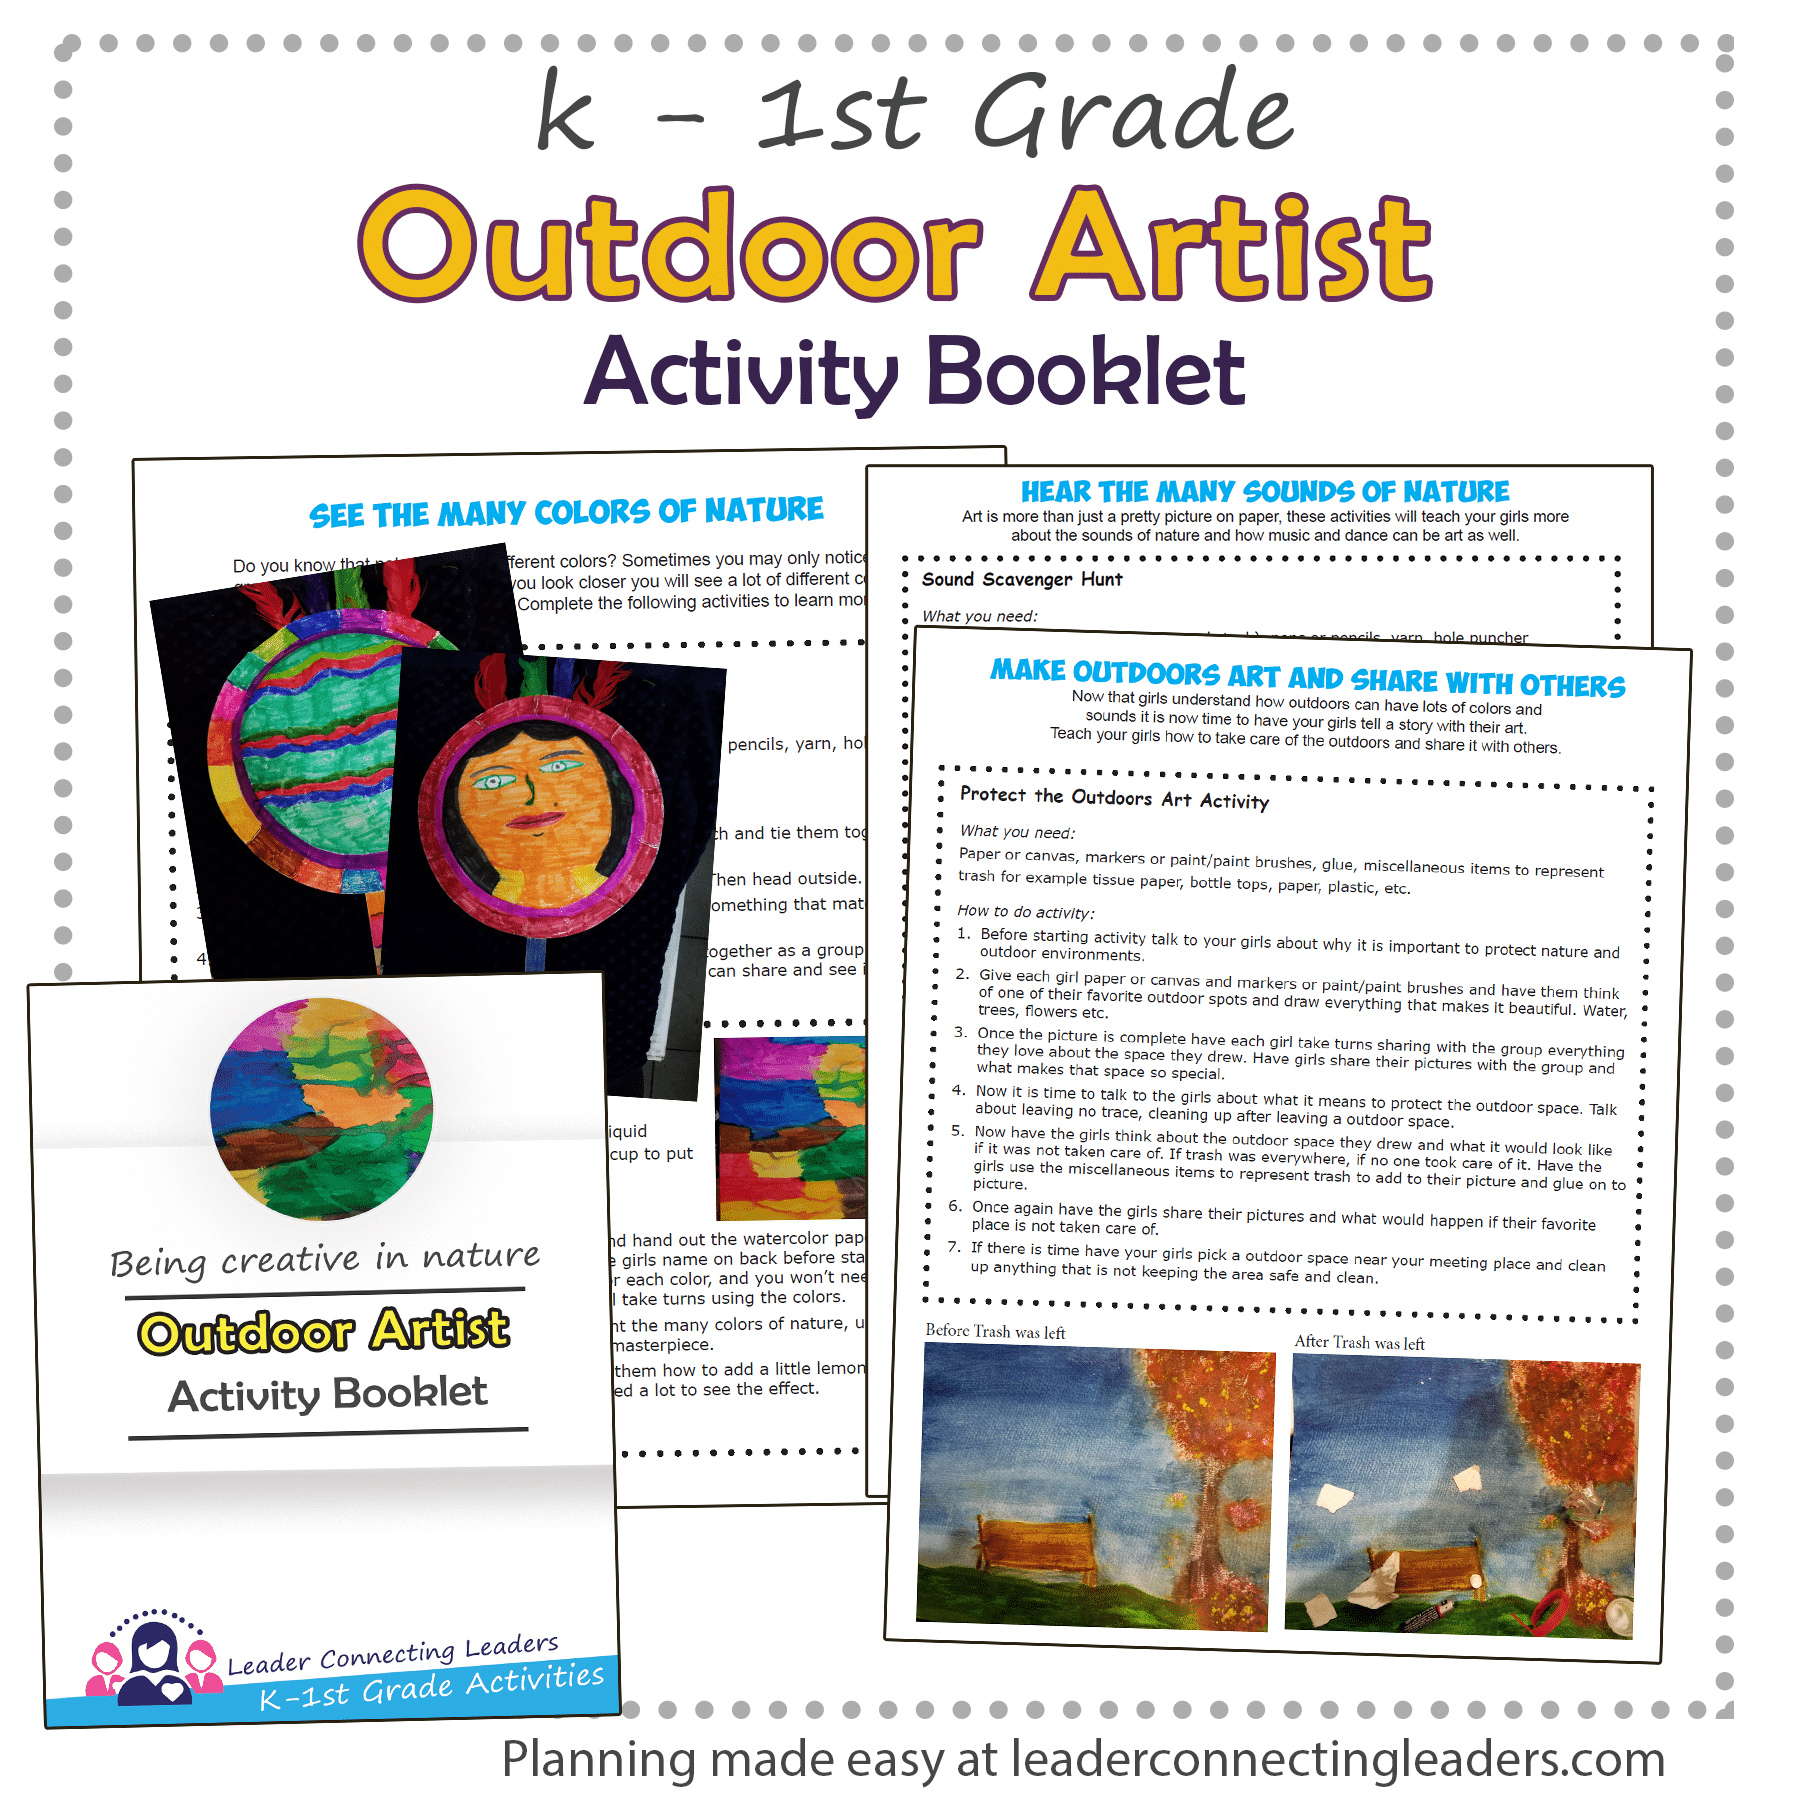 Outdoor Art Maker Activity Booklet - Leader Connecting Leaders